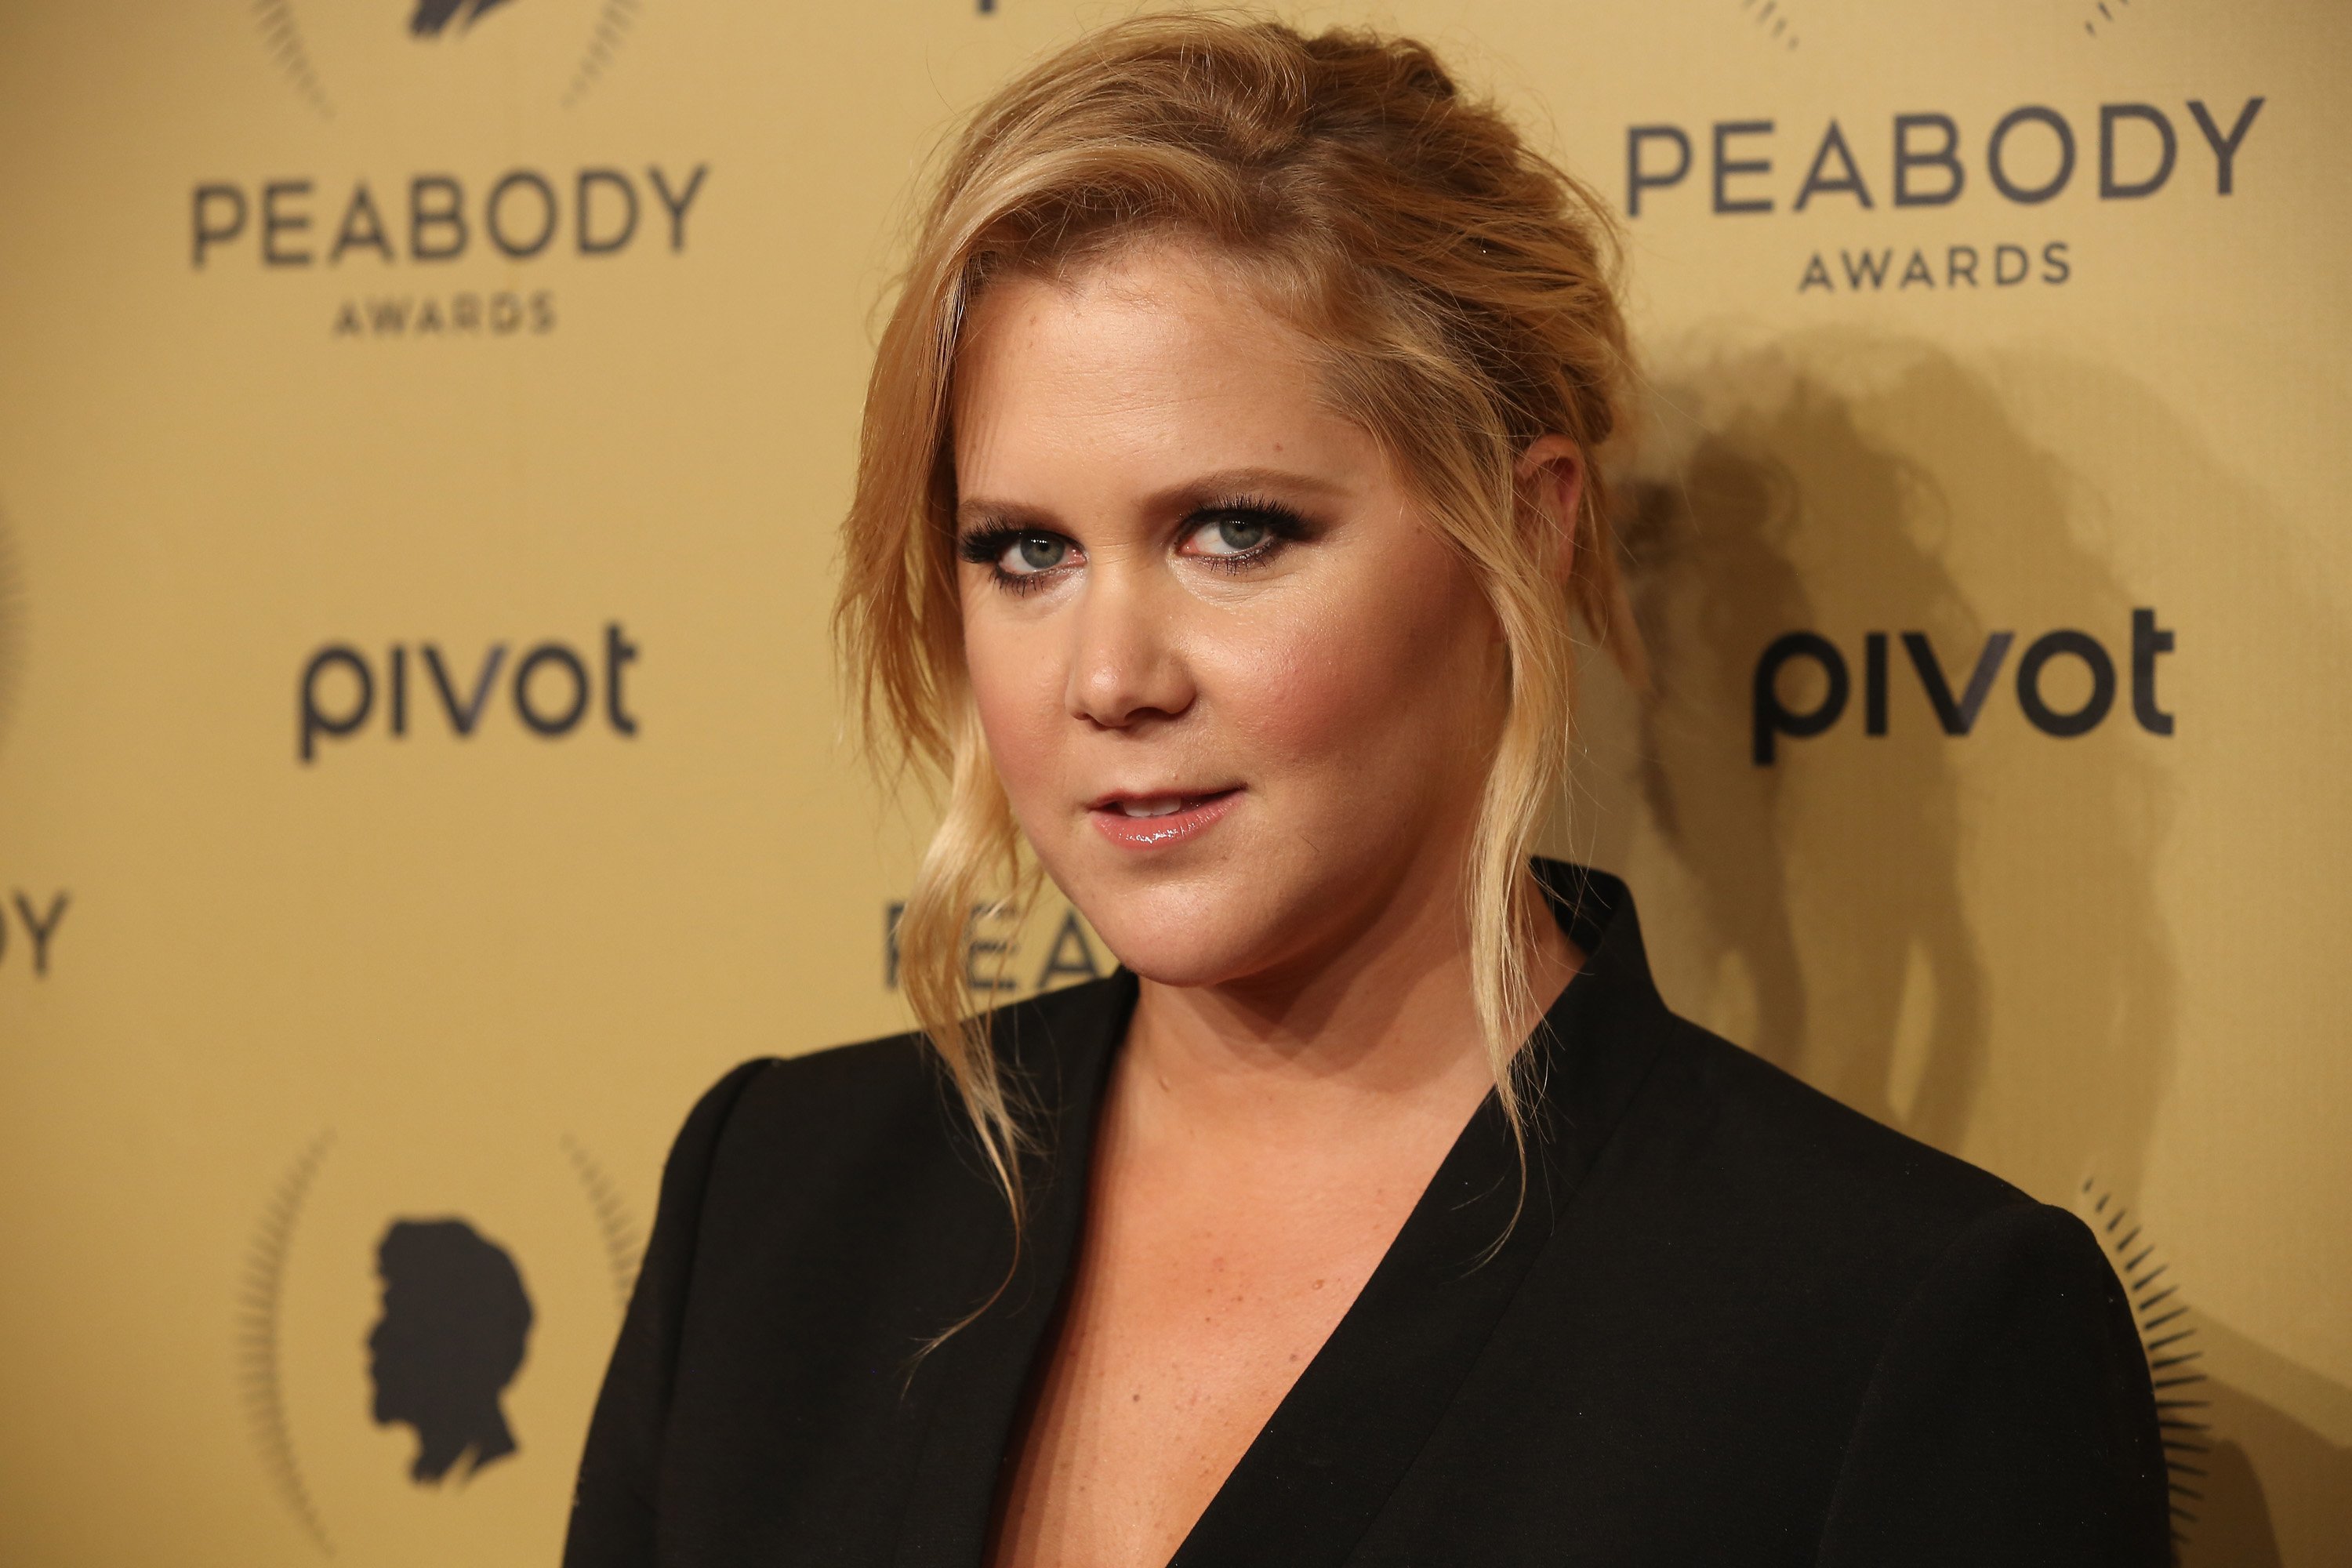 Amy Schumer attends The 74th Annual Peabody Awards Ceremony at Cipriani Wall Street on May 31, 2015 in New York City. | Photo: GettyImages